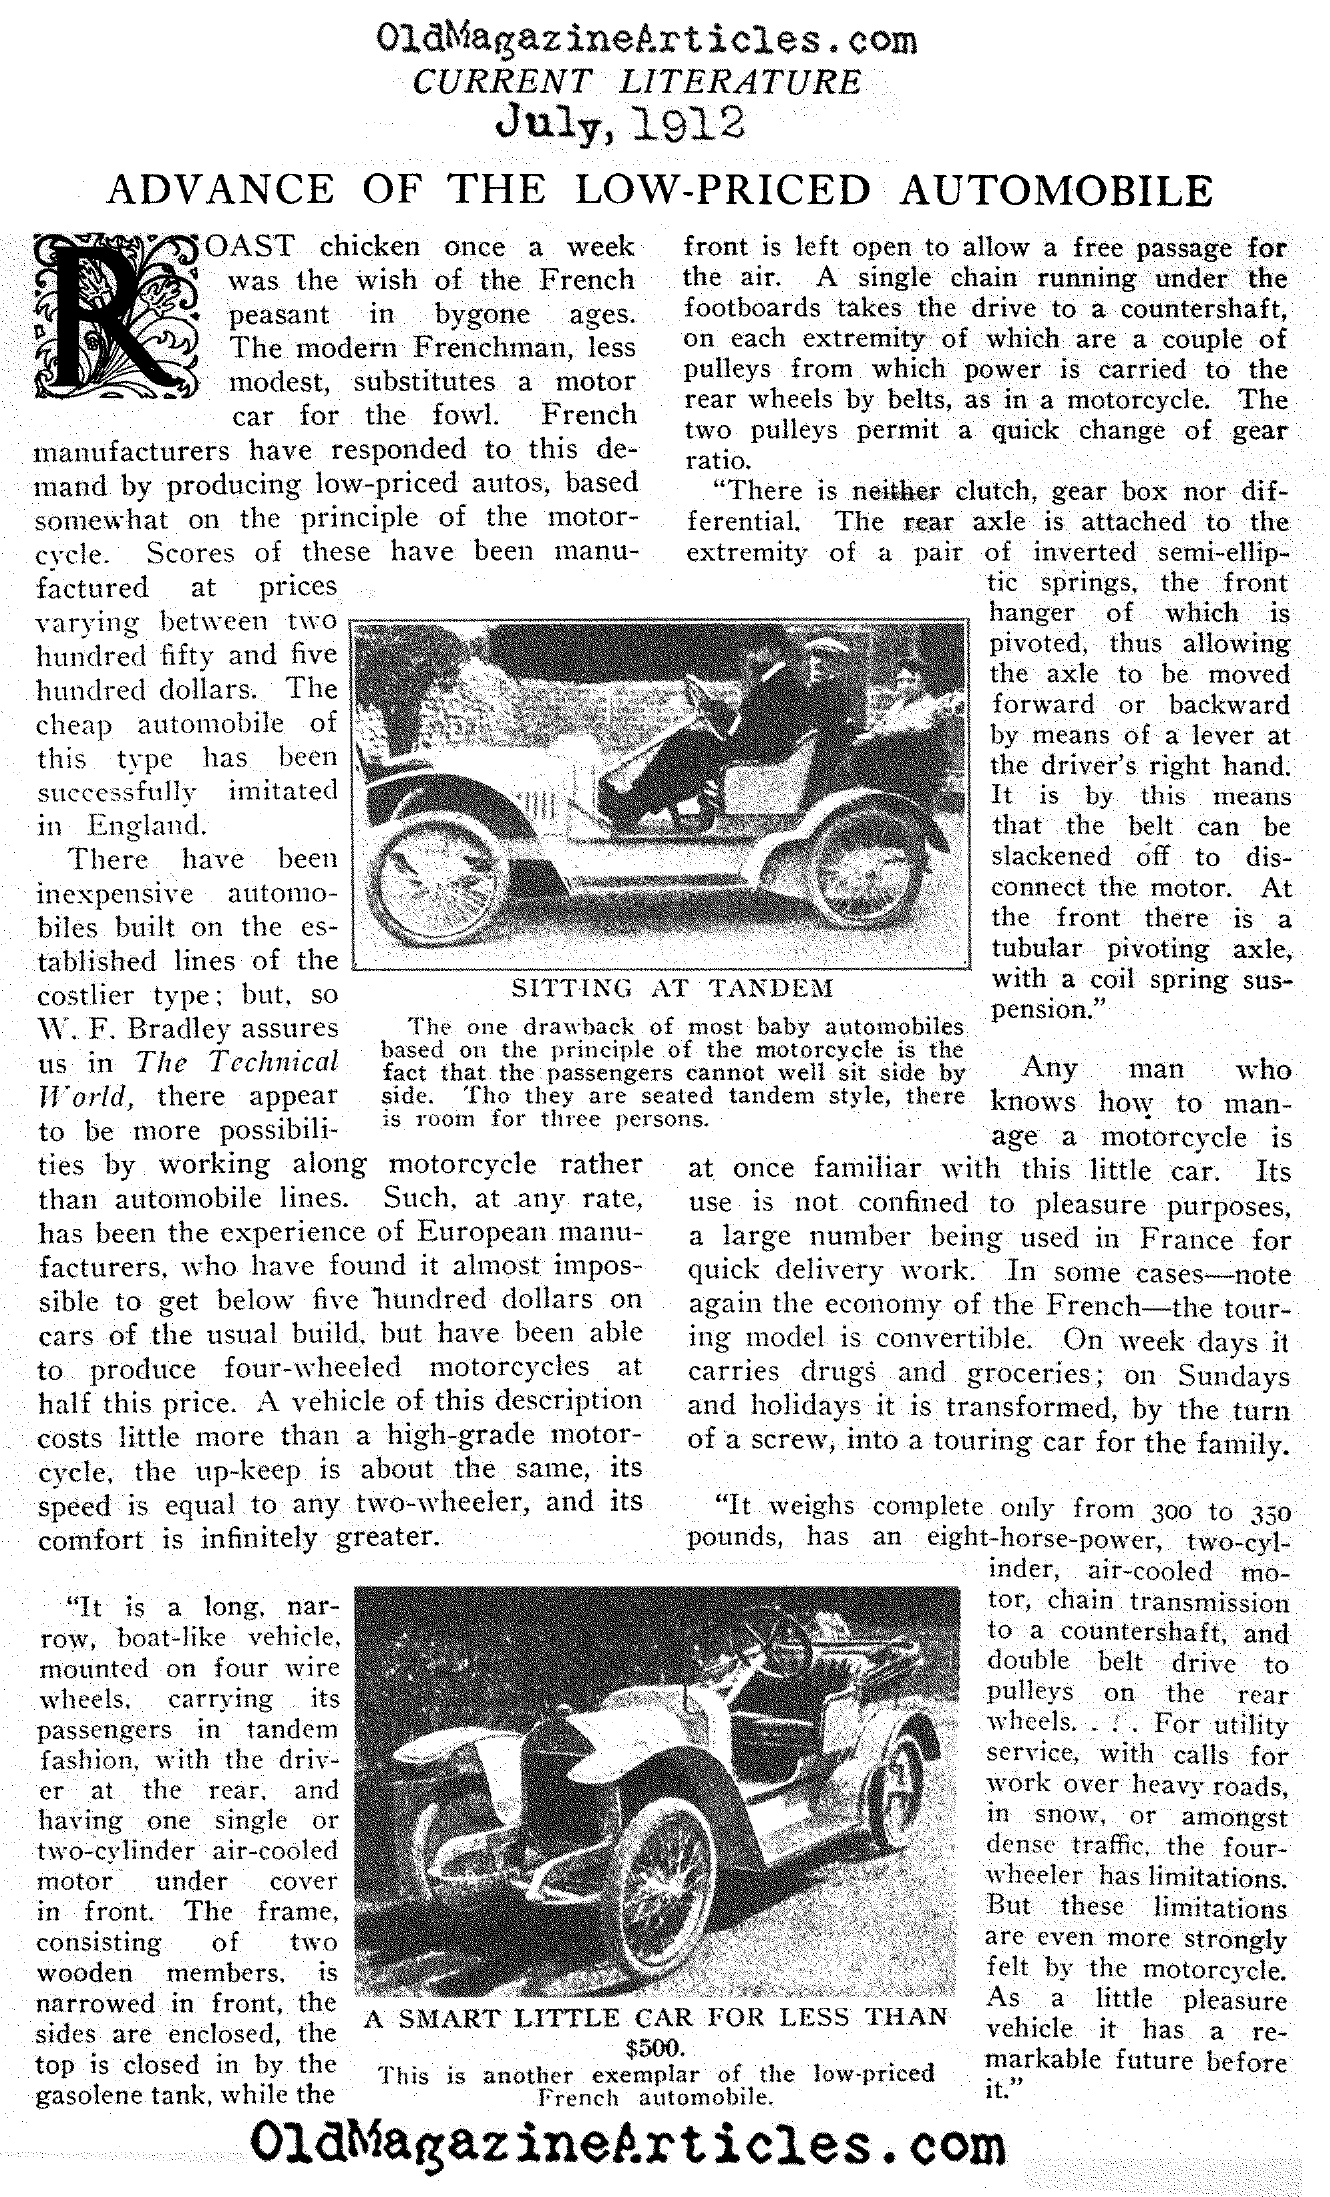 The Advance of the Low-Priced Automobile (Current Literature Magazine, 1912)